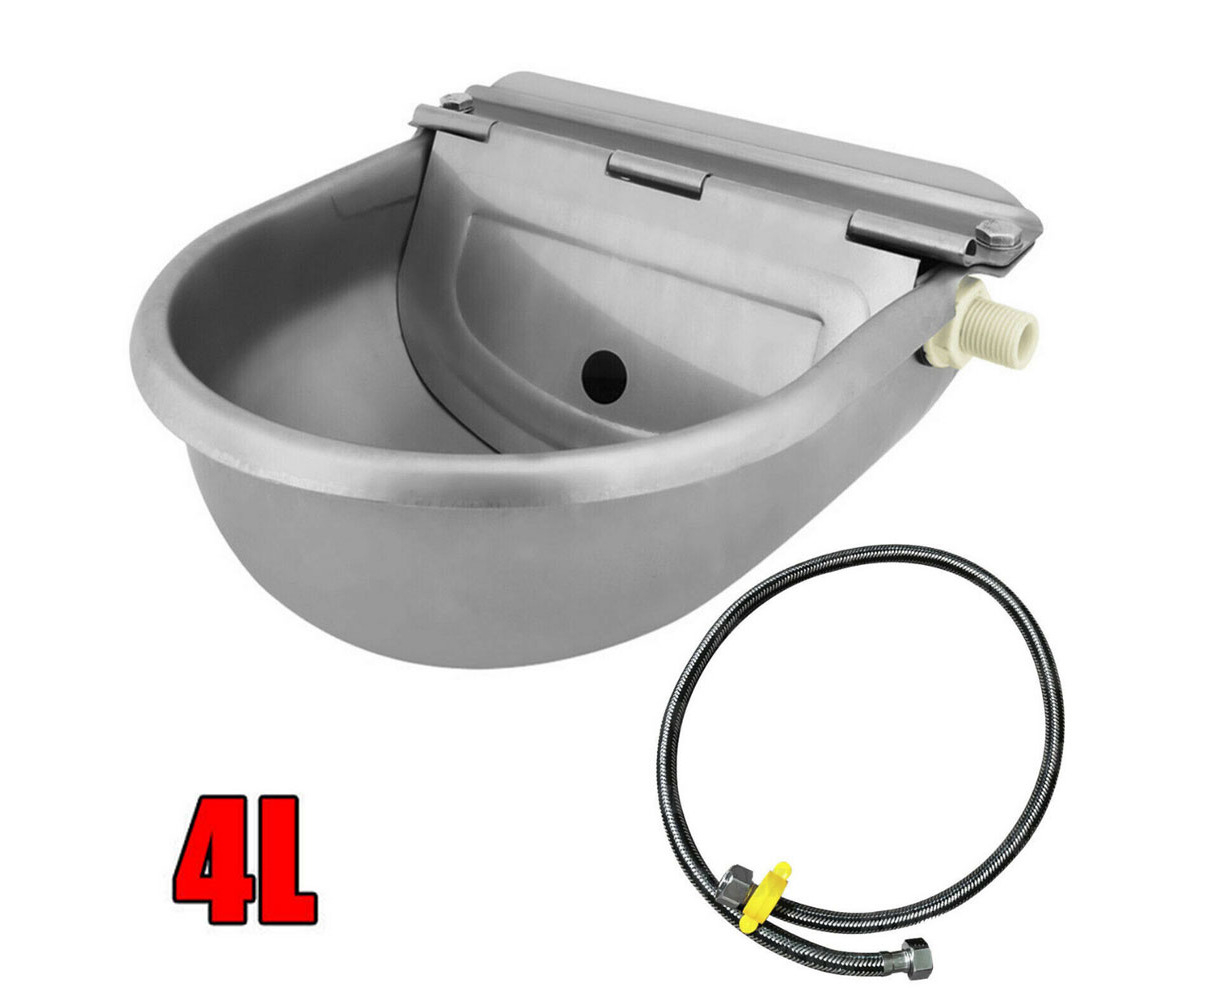 Automatic Water Bowl for Dog Galvanized Stainless Steel Automatic Water Bowl for Livestock Horse Portable Drinking Waterer Bowl with Float Valve Water Trough for Horse Cattle Goat Sheep 